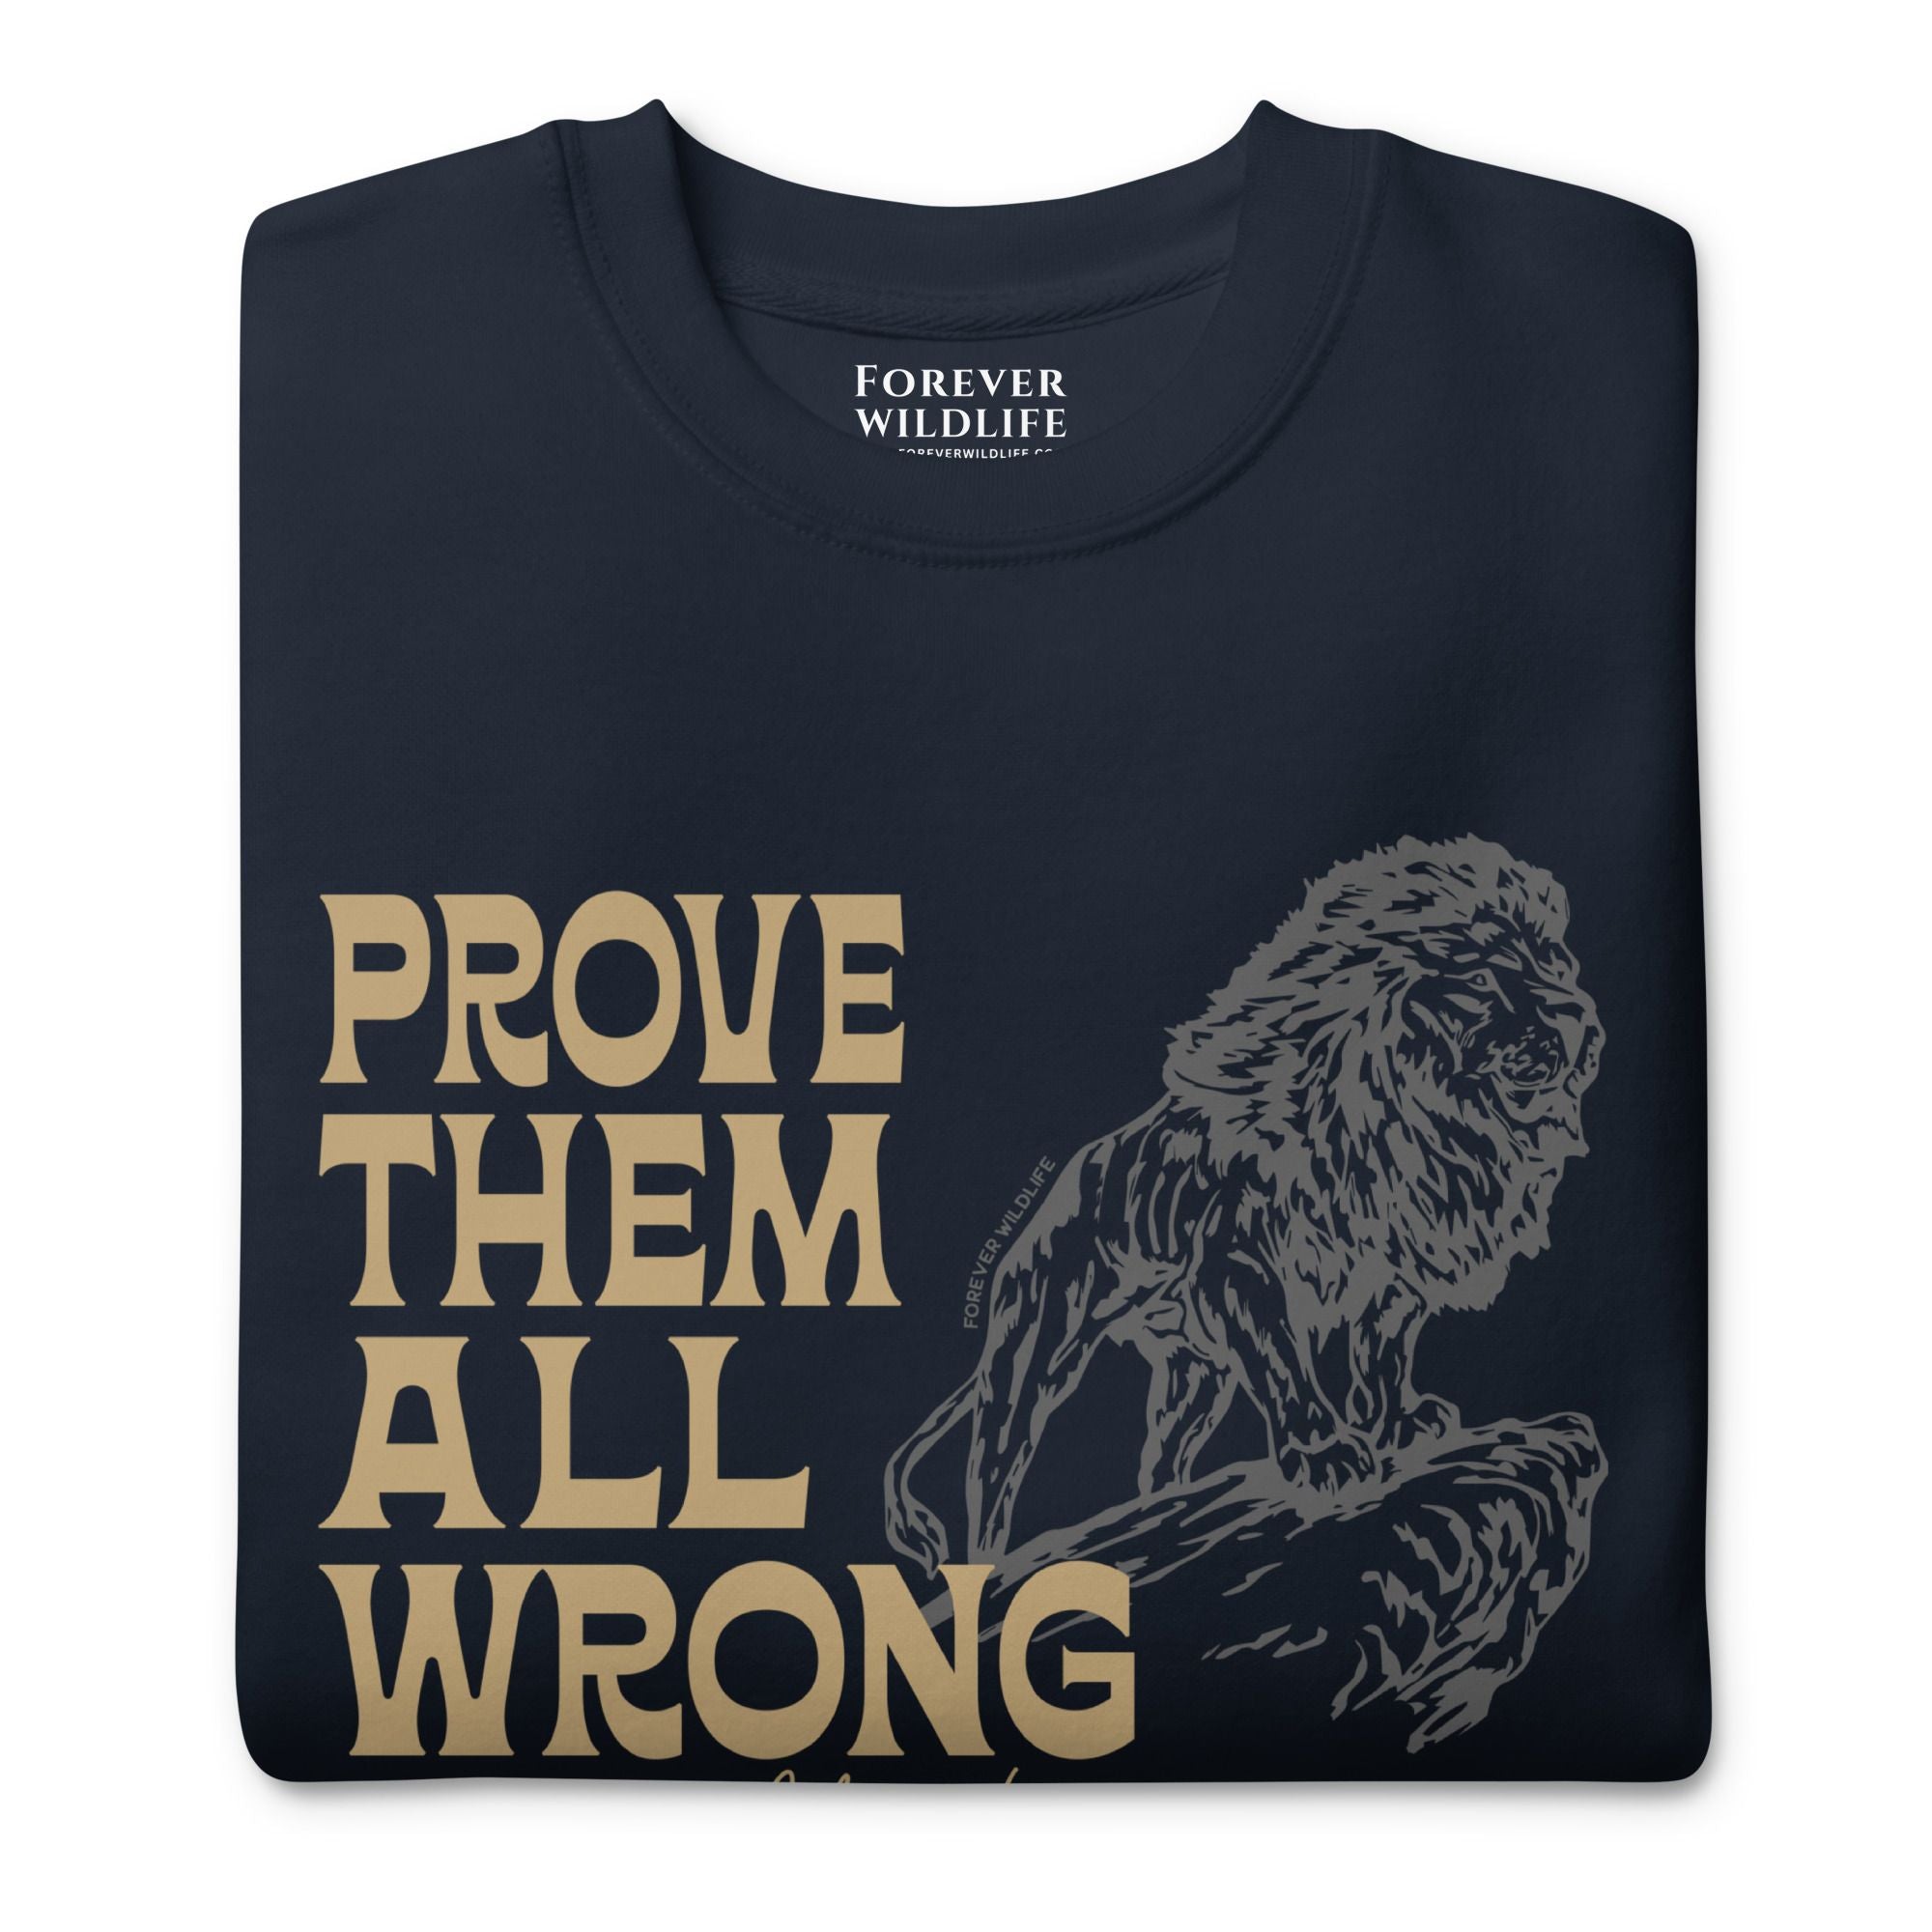 Lion Sweatshirt in Navy-Premium Wildlife Animal Inspiration Sweatshirt Design with 'Prove Them All Wrong About You' text, part of Wildlife Sweatshirts & Clothing from Forever Wildlife.